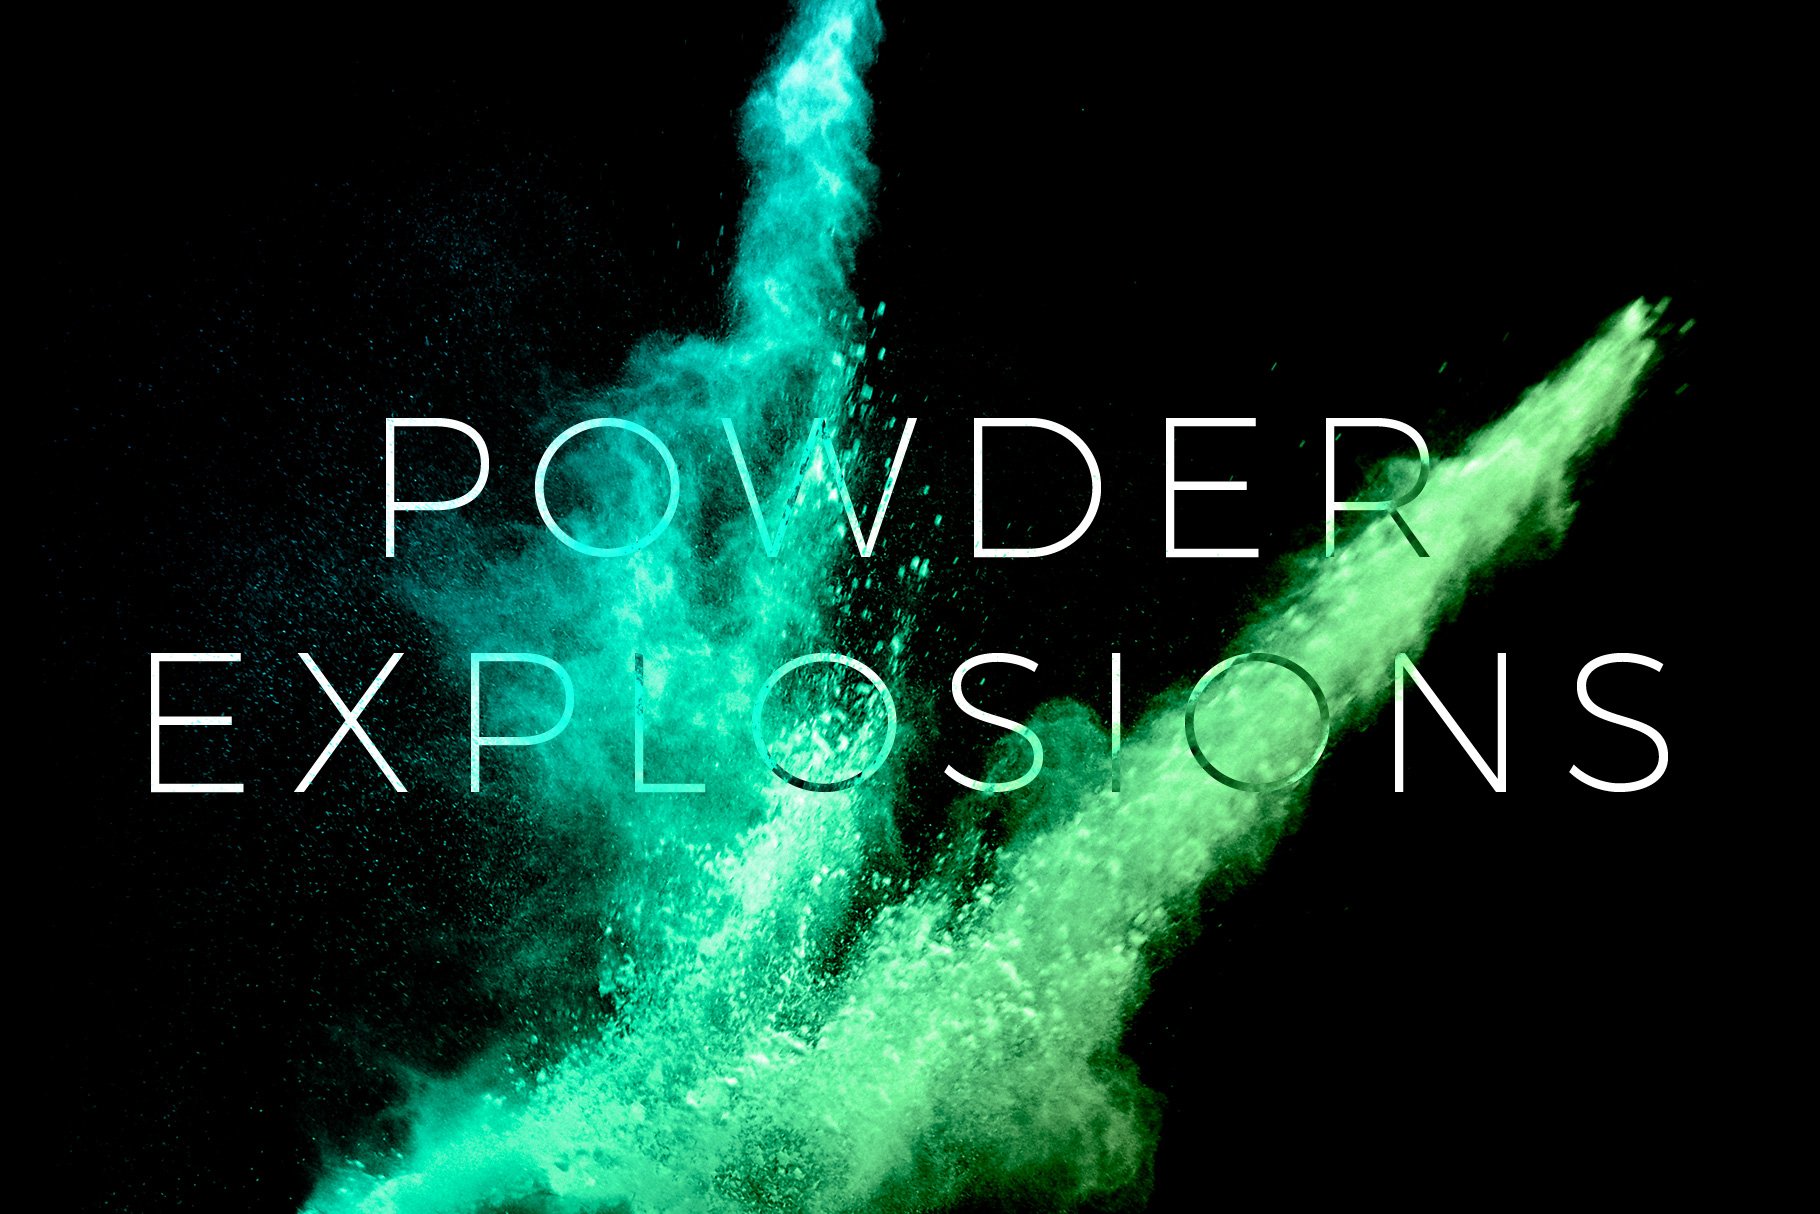 Powder Explosion Brushespreview image.